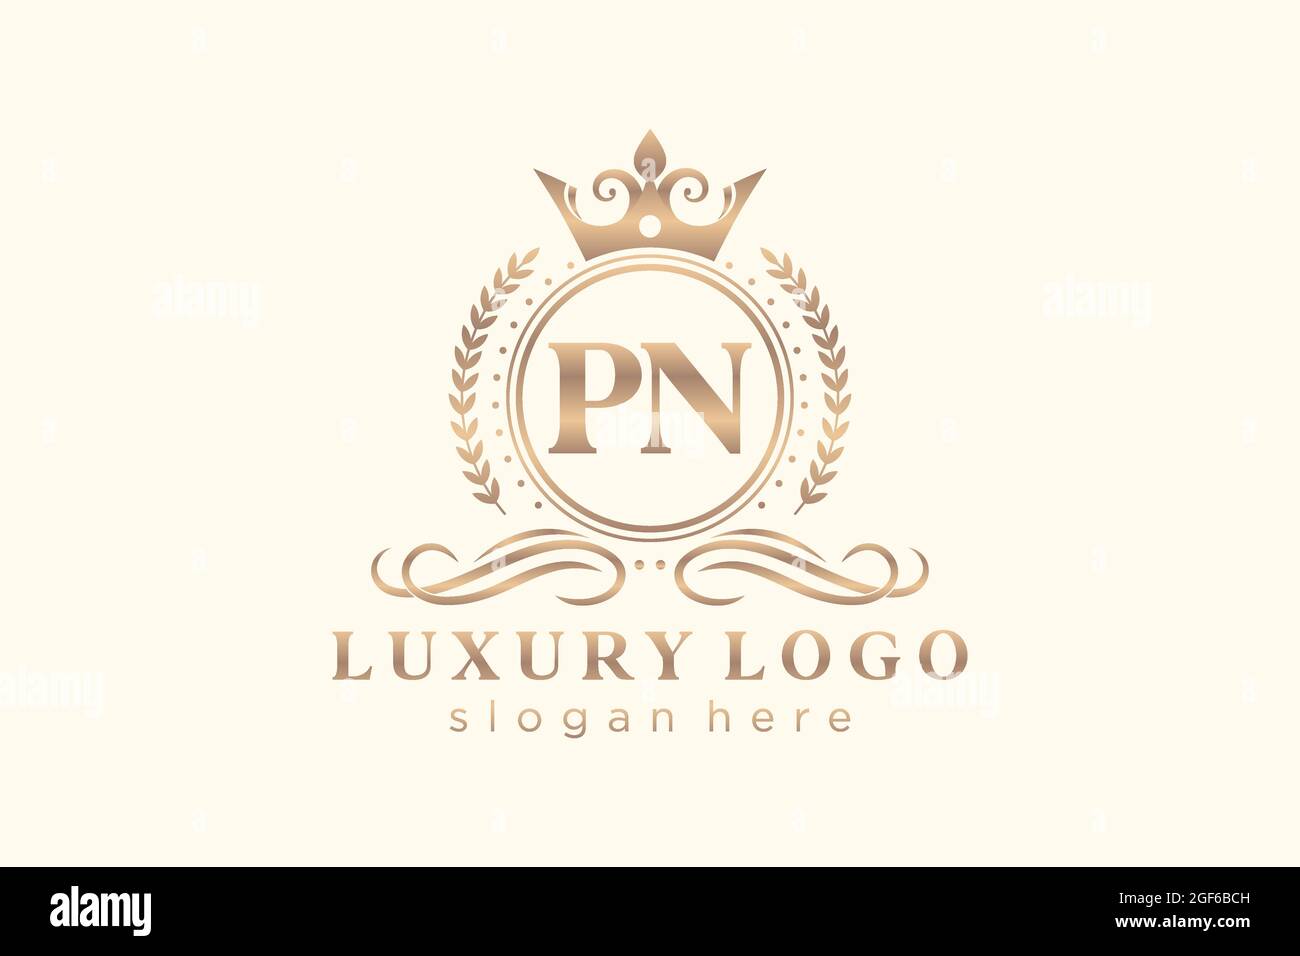 PN Letter Royal Luxury Logo template in vector art for Restaurant, Royalty, Boutique, Cafe, Hotel, Heraldic, Jewelry, Fashion and other vector illustr Stock Vector